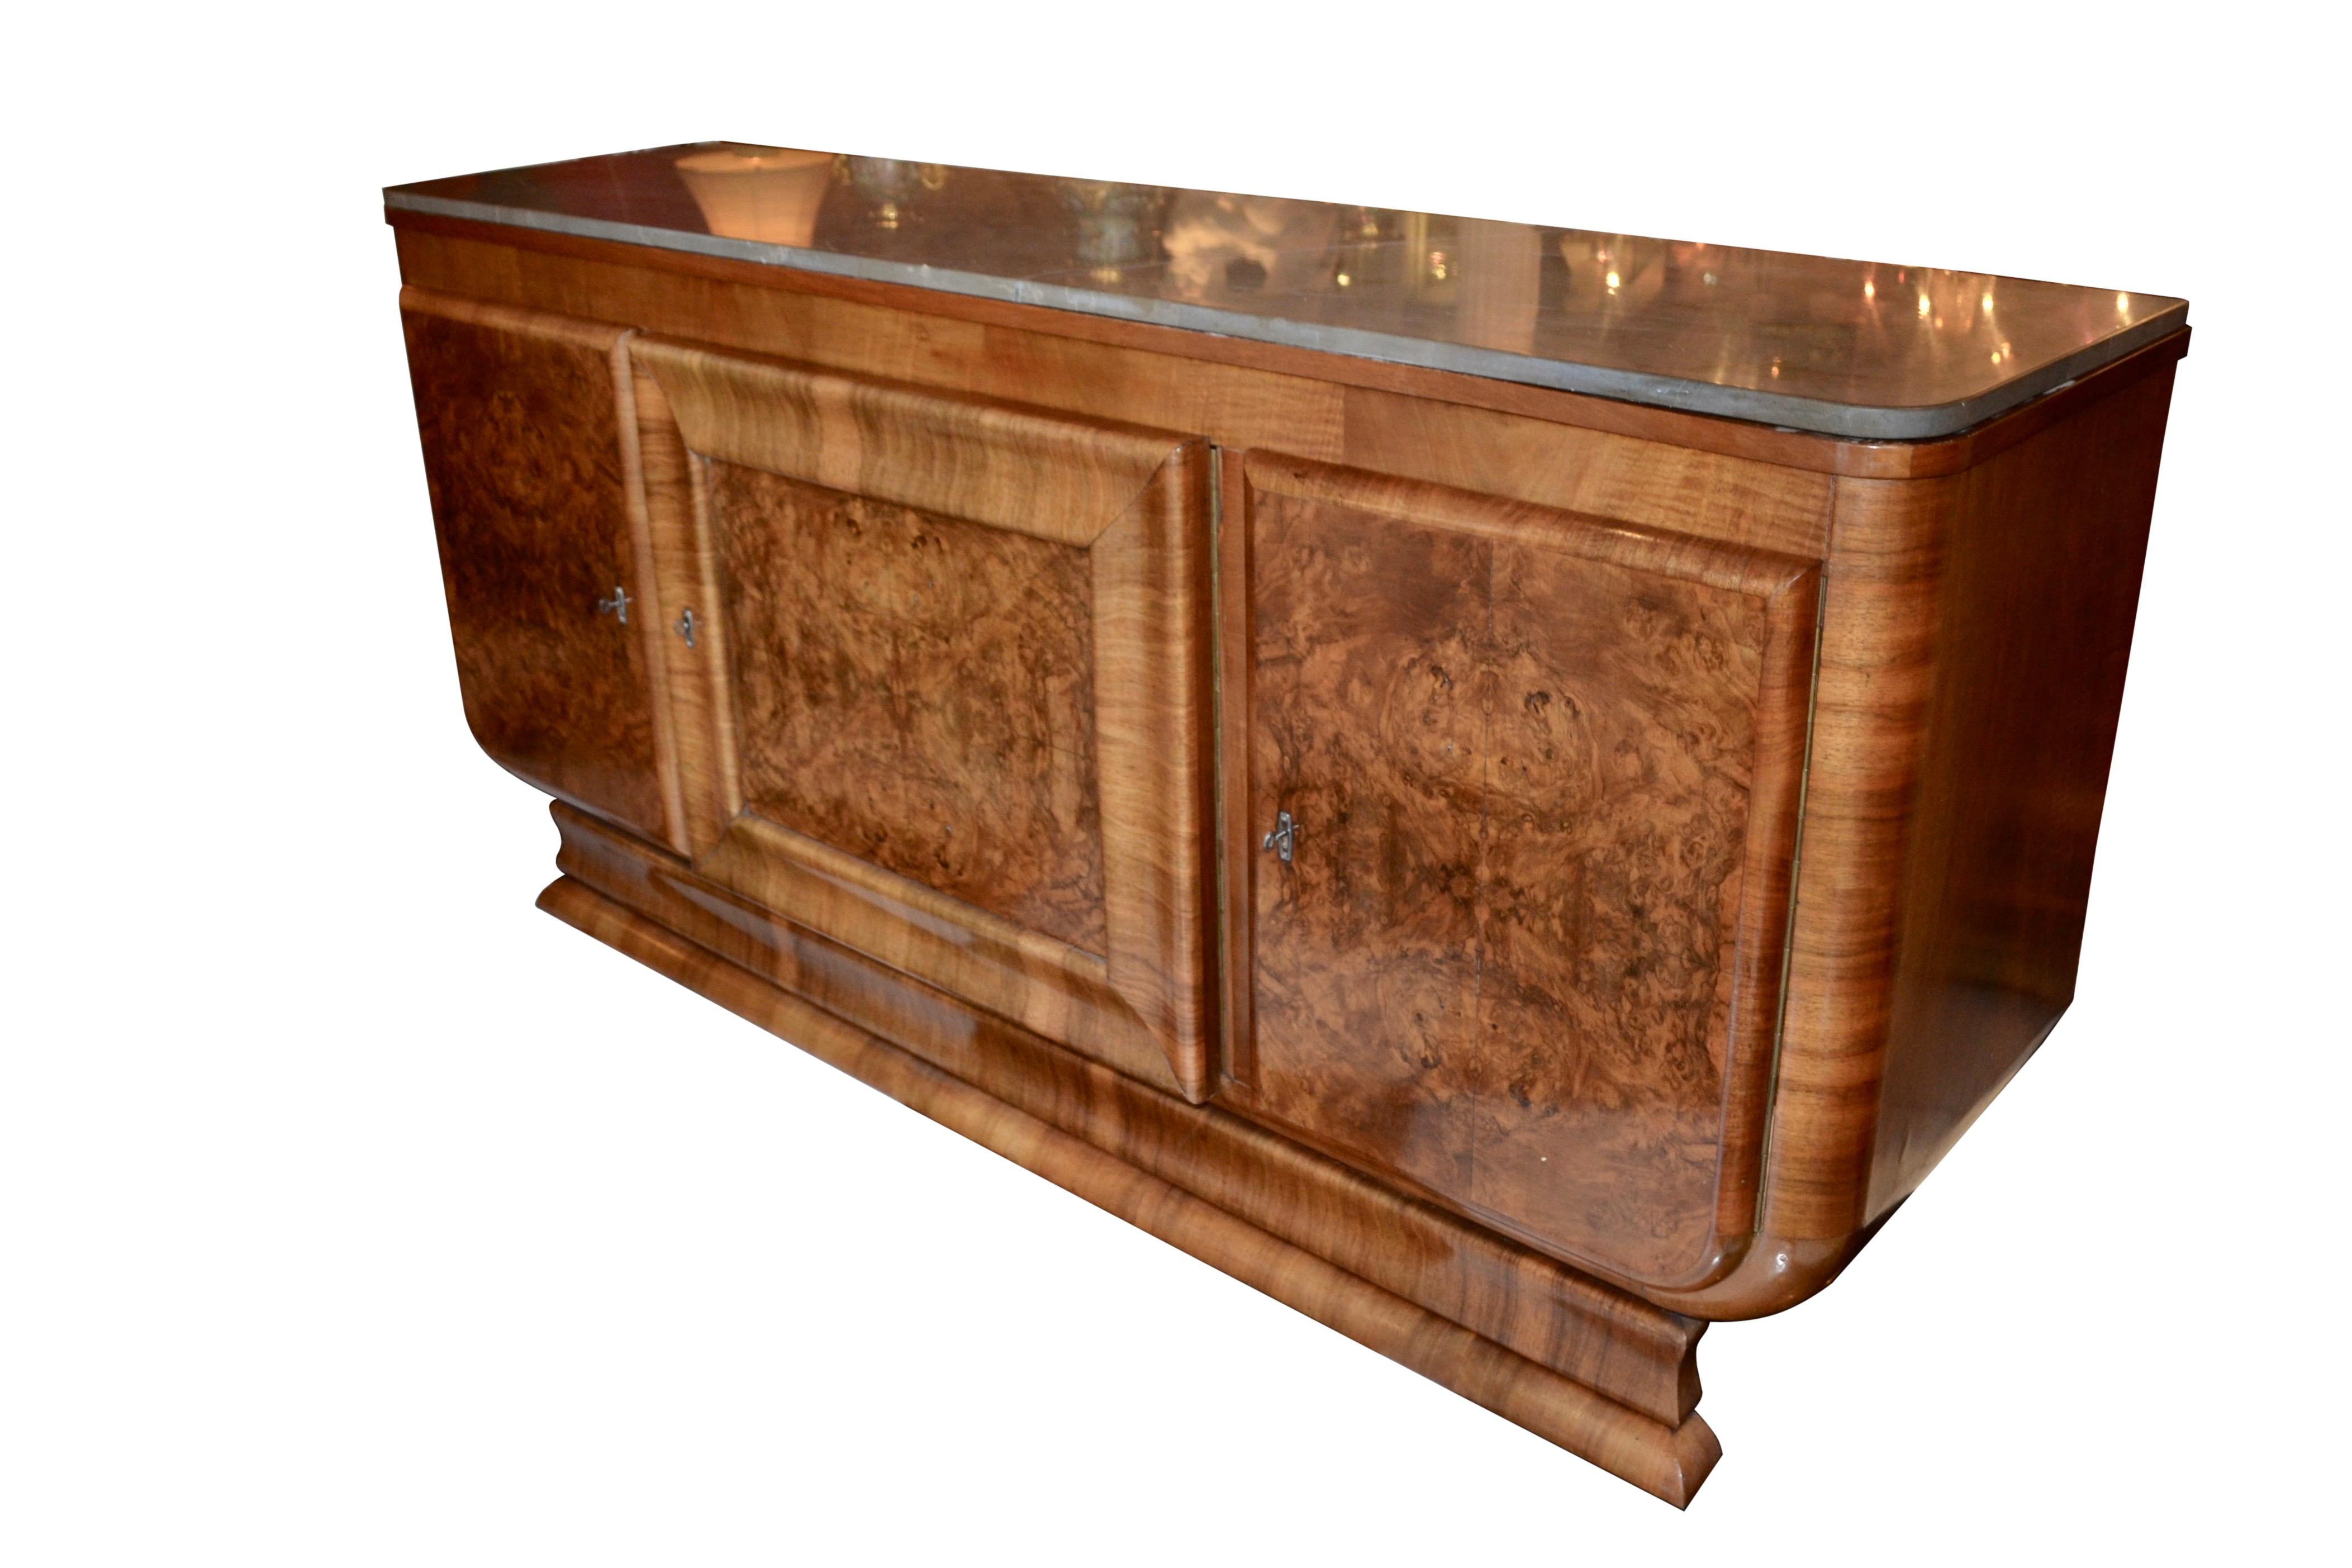 French Art Deco Burl Walnut Buffet Sideborad In Good Condition For Sale In Vancouver, British Columbia